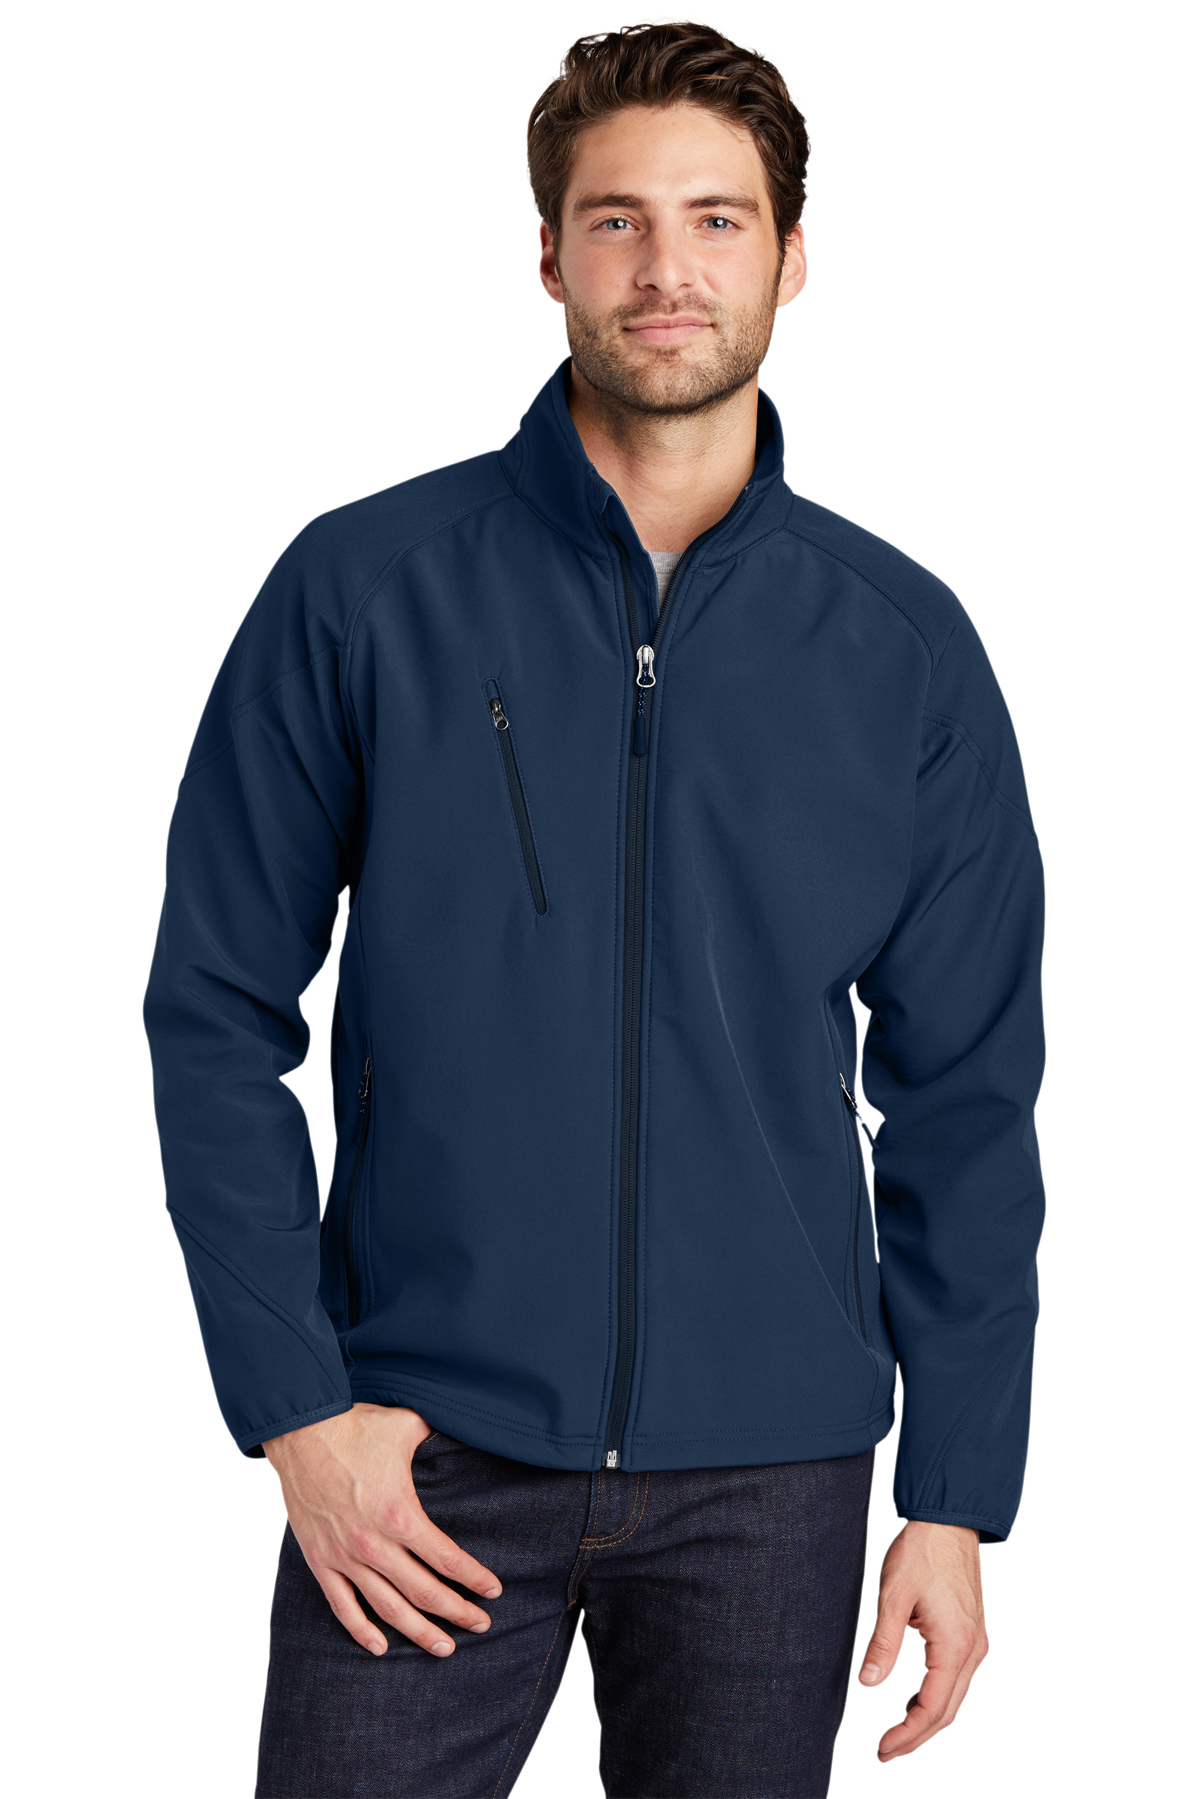 Port Authority Textured Soft Shell Jacket | Product | Company Casuals